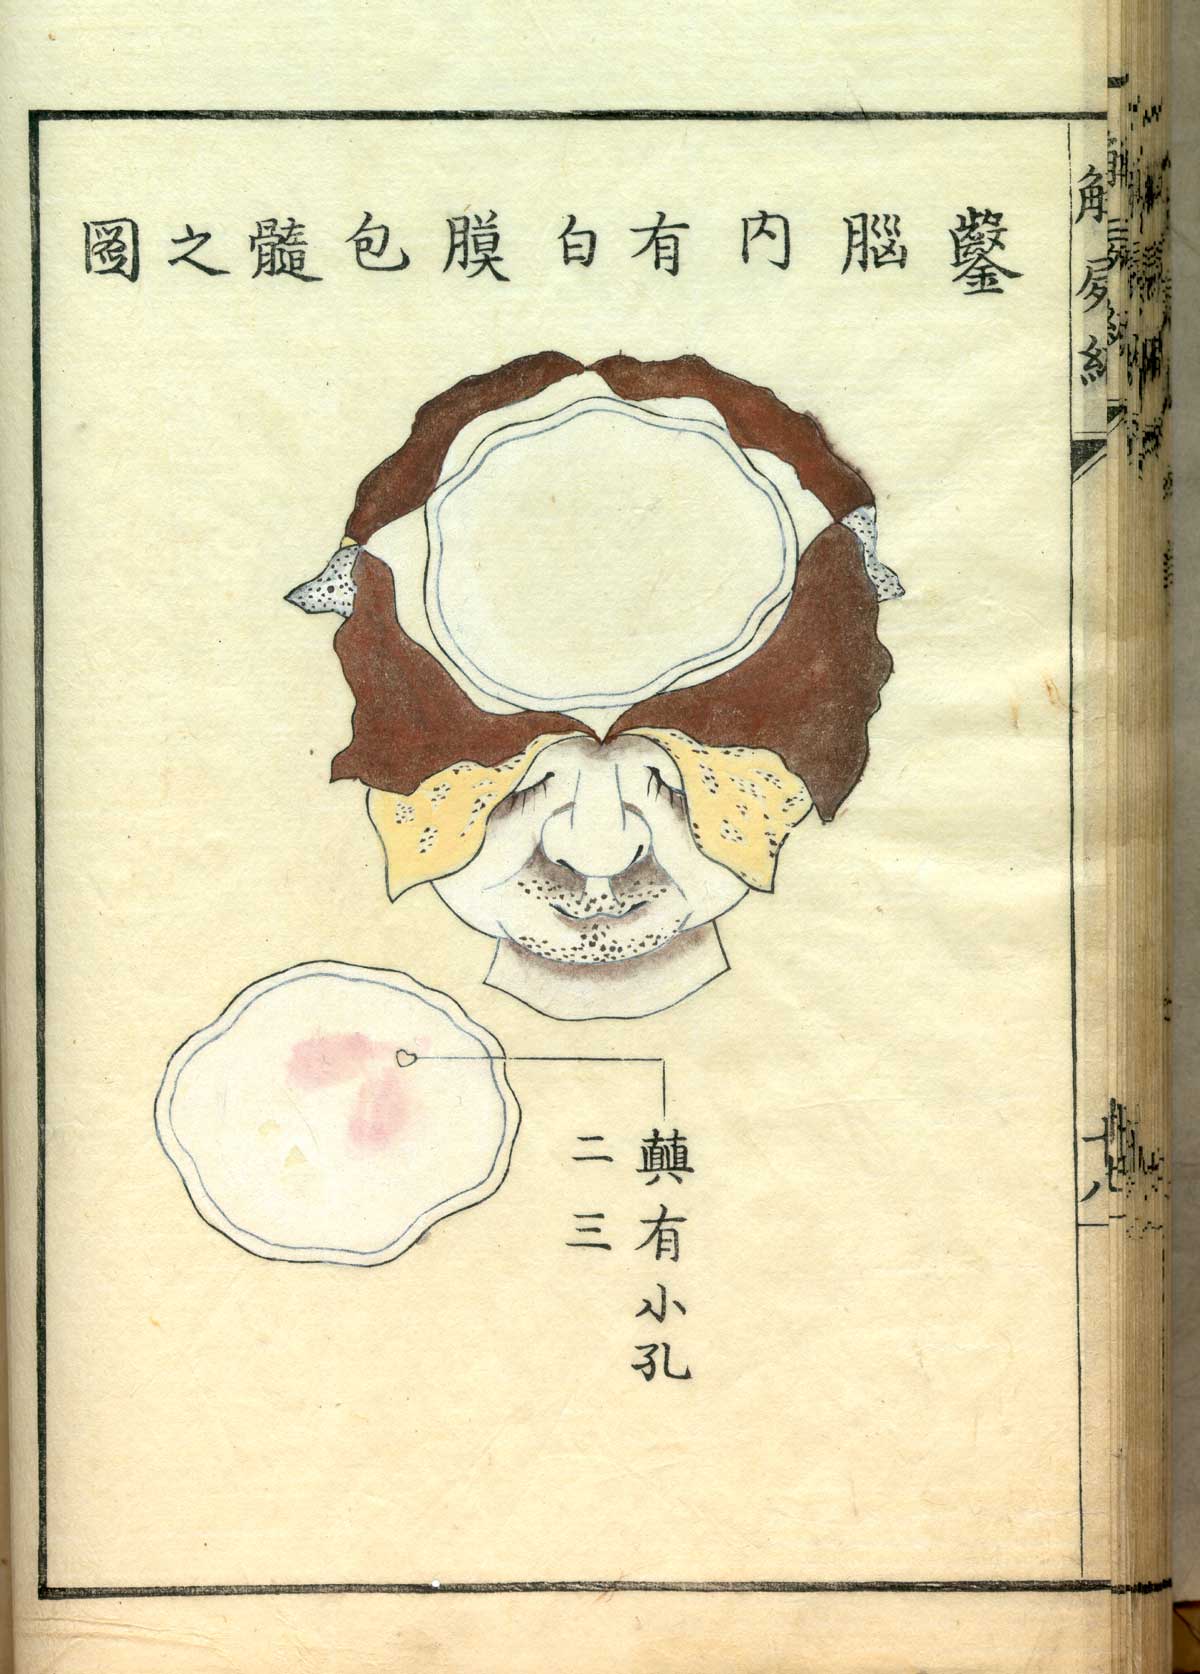 Hand colored woodcut of the head facing forward with the scalp peeled away and part of the skull removed to reveal the dura mater, with Japanese text above and below describing some of the structures, from Shinnin Kawaguchi's Kaishi hen, NLM Call no.: WZ 260 K21k 1772.